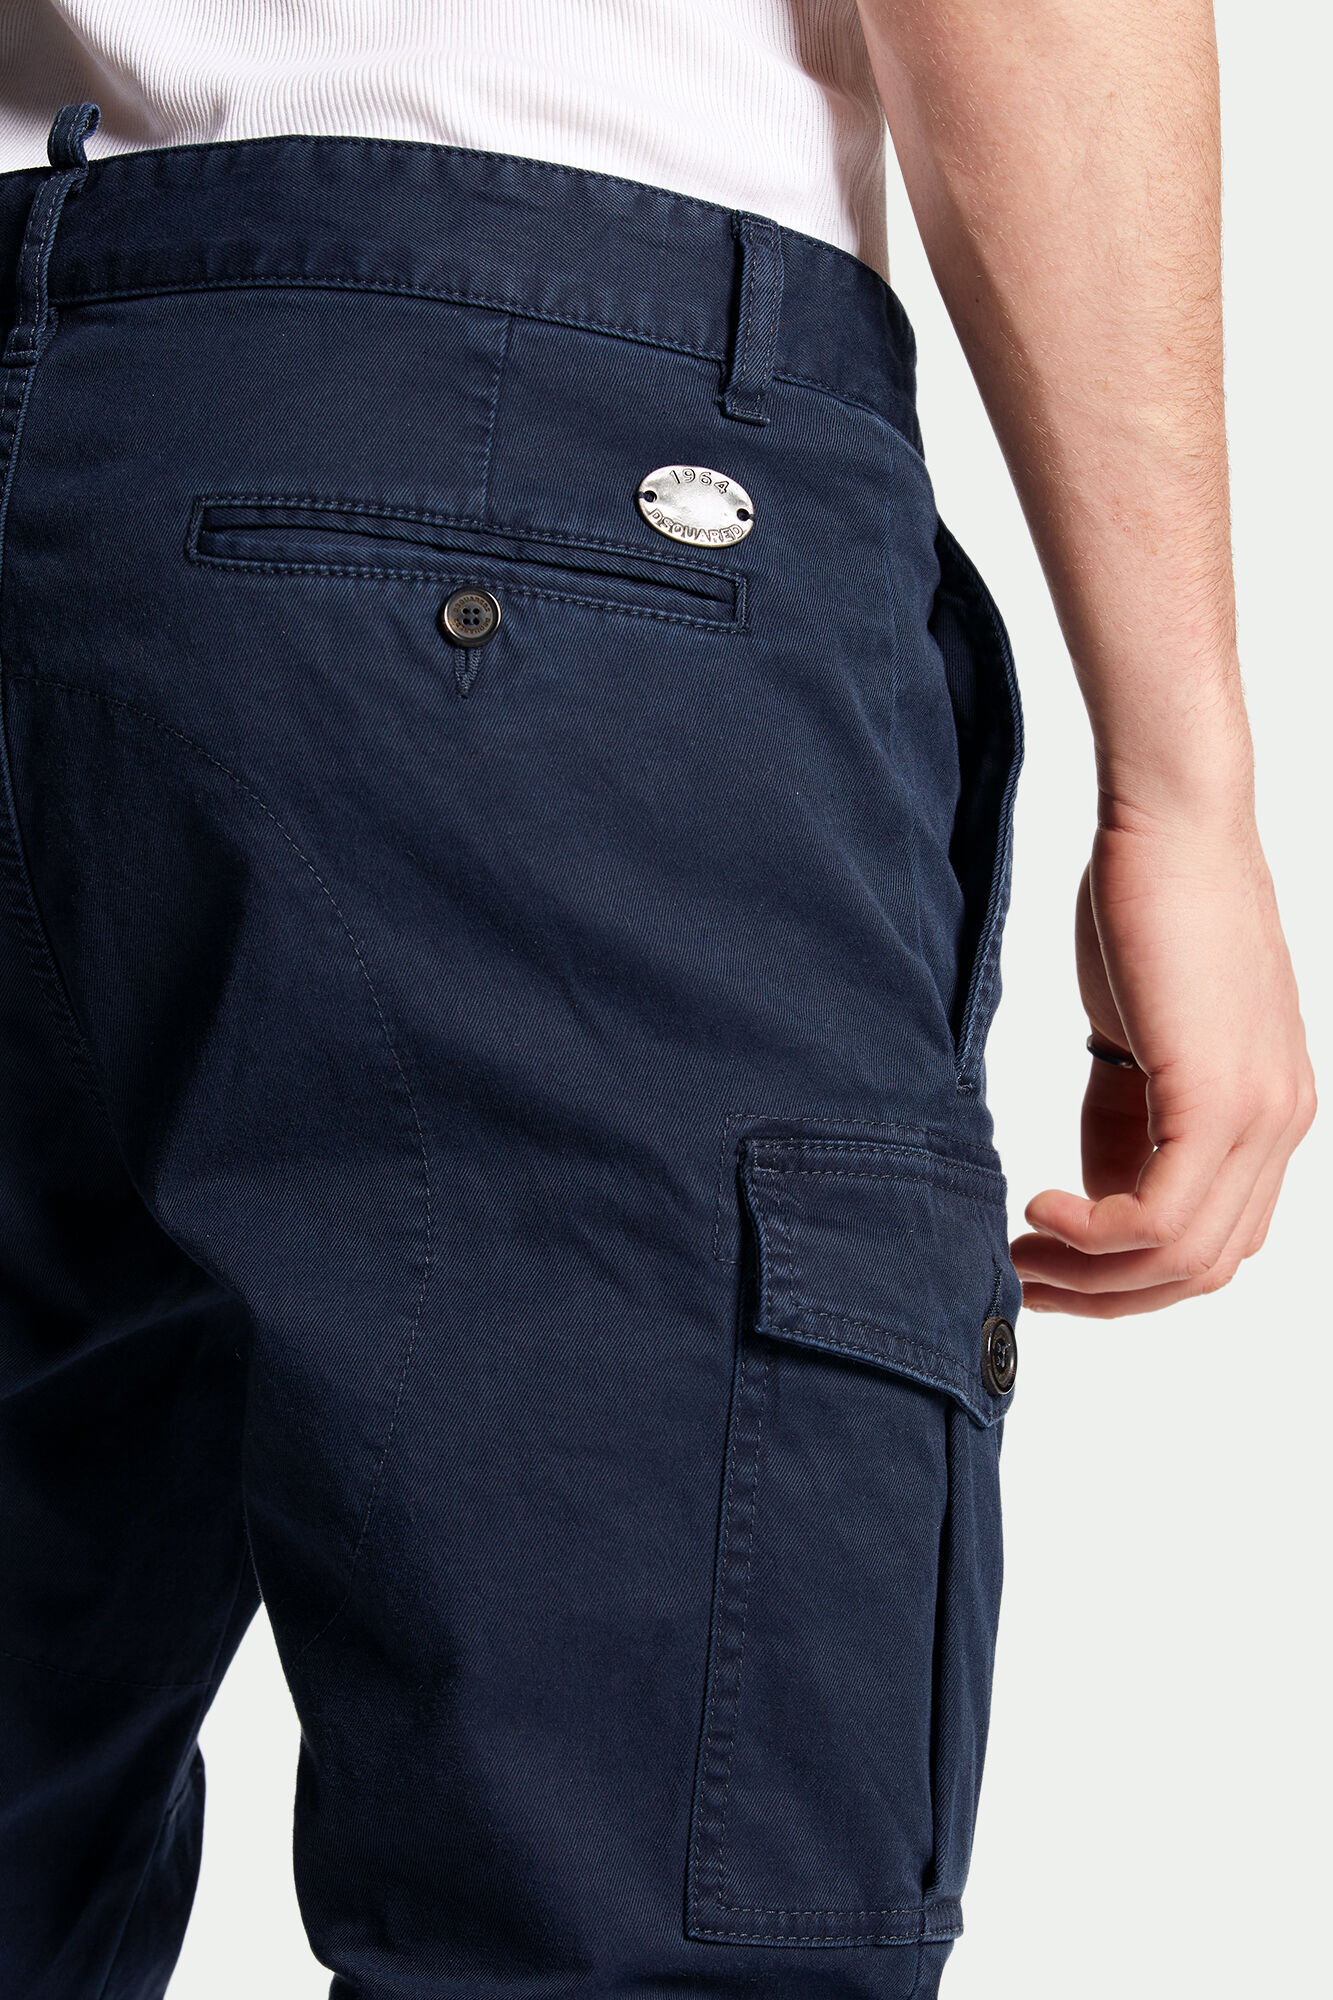 DSQUARED2 Sexy Cargo Pant in Navy 52